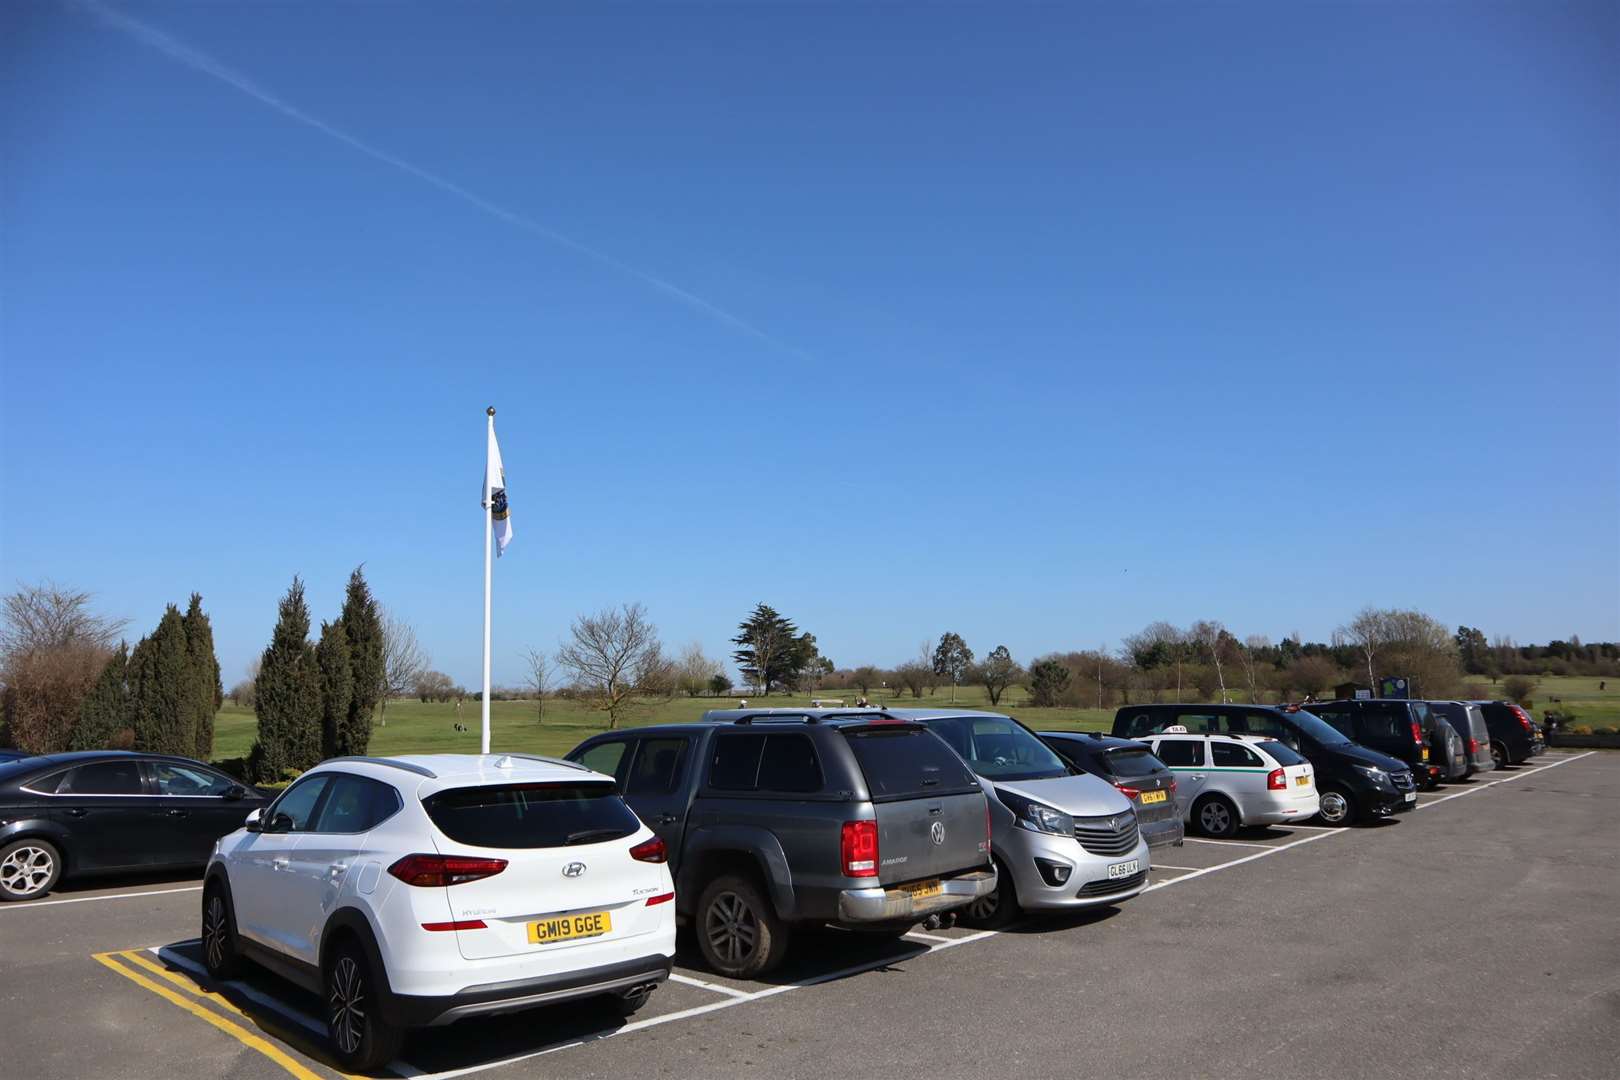 The packed car park at Sheerness Golf Club on Monday after Covid-19 lockdown restrictions were eased